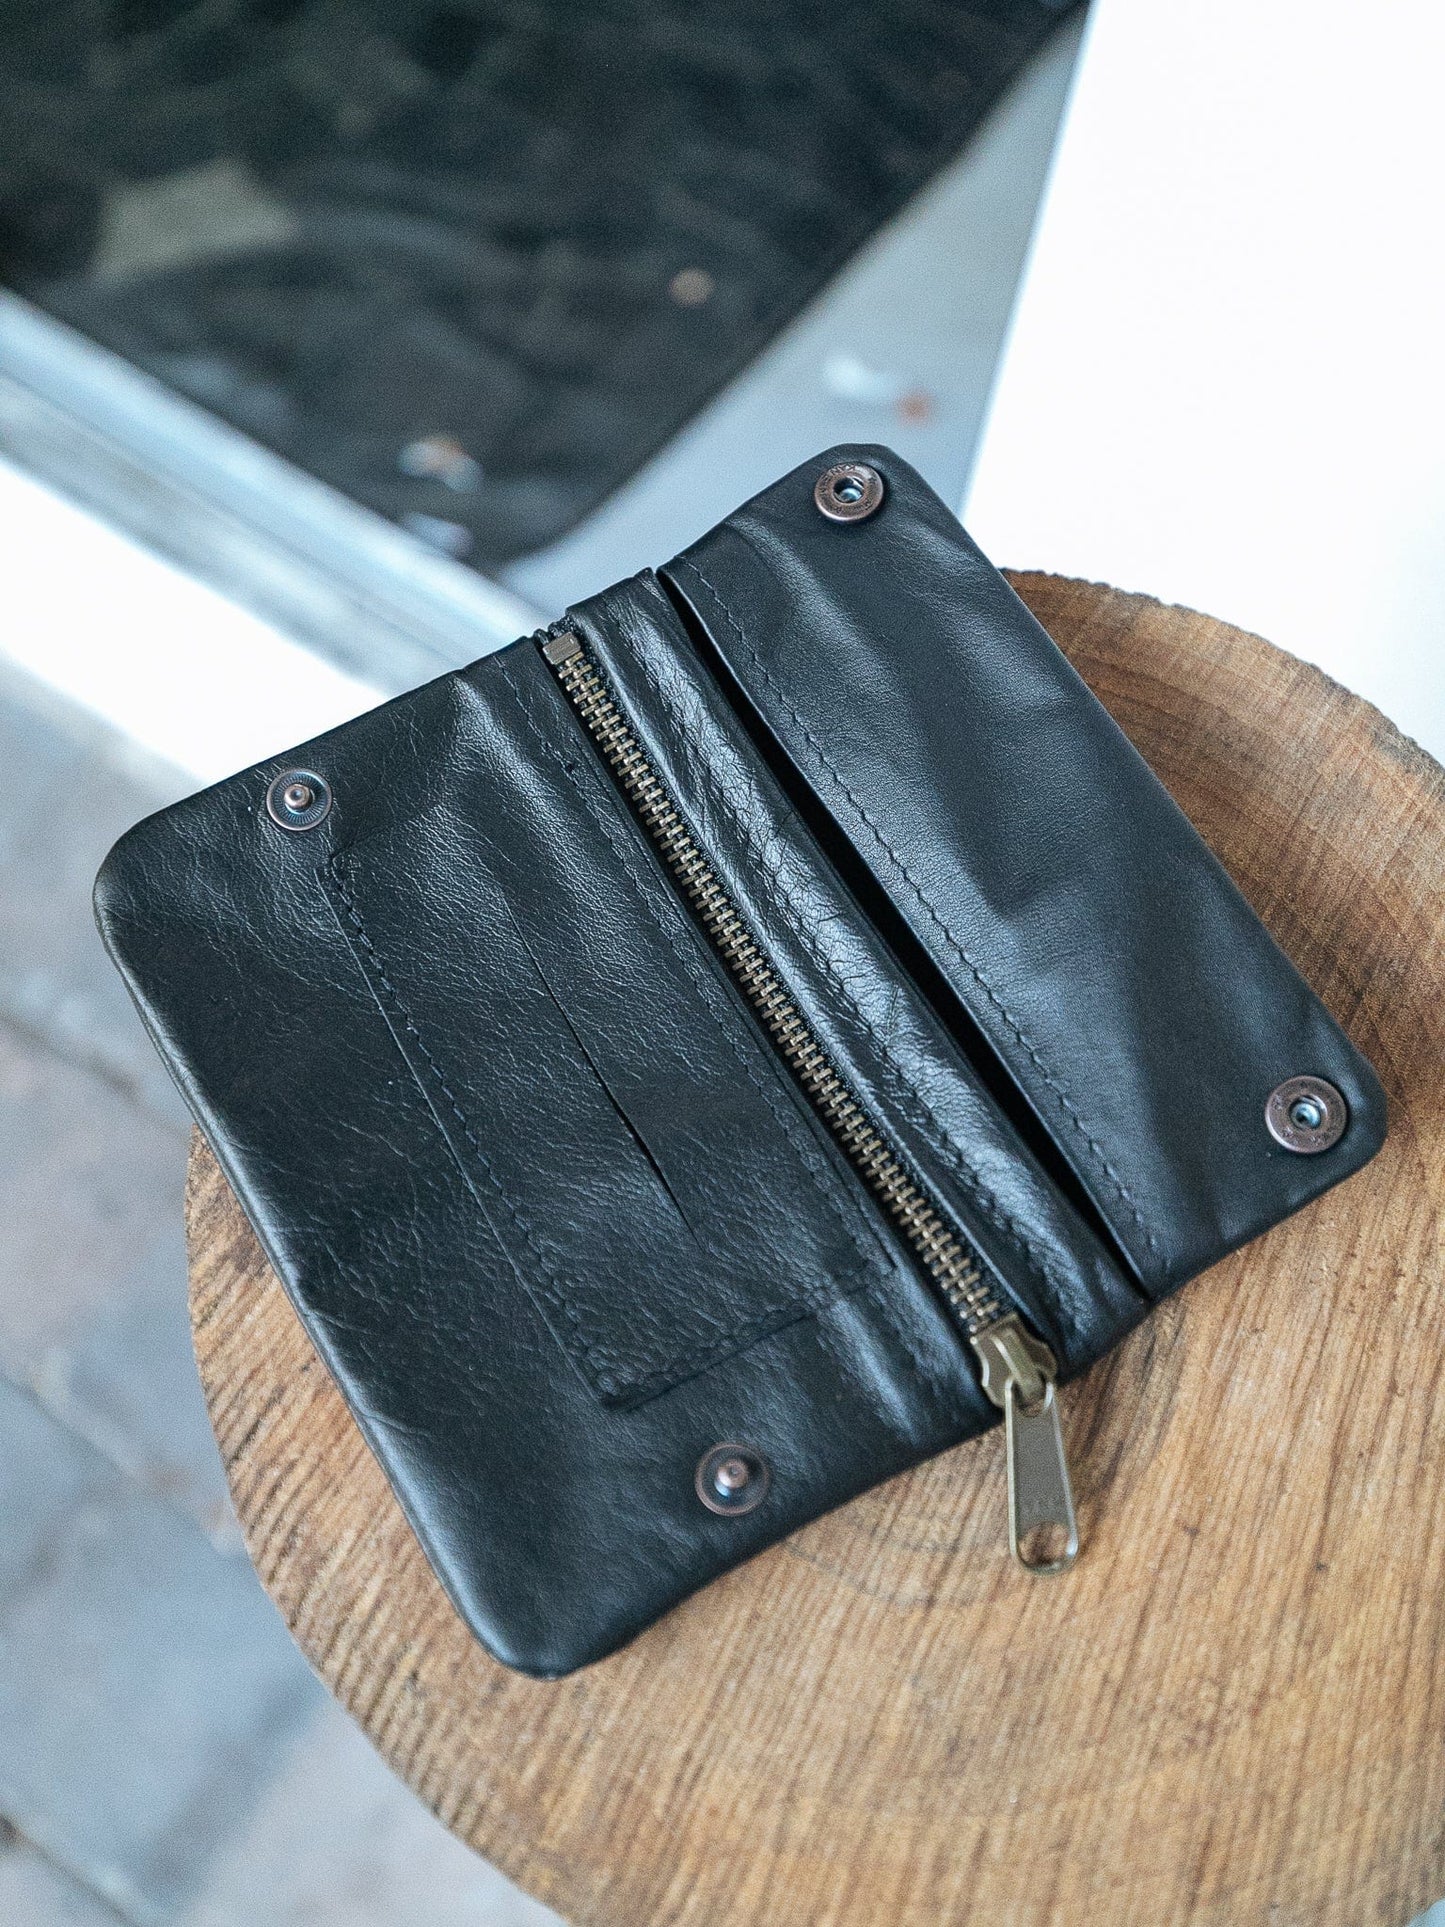 The Real McCaul Tobacco Pouches Tobacco Pouch - Kangaroo Australian Made Australian Owned Leather Tobacco Pouch Australian Made Kangaroo & Cowhide Leather